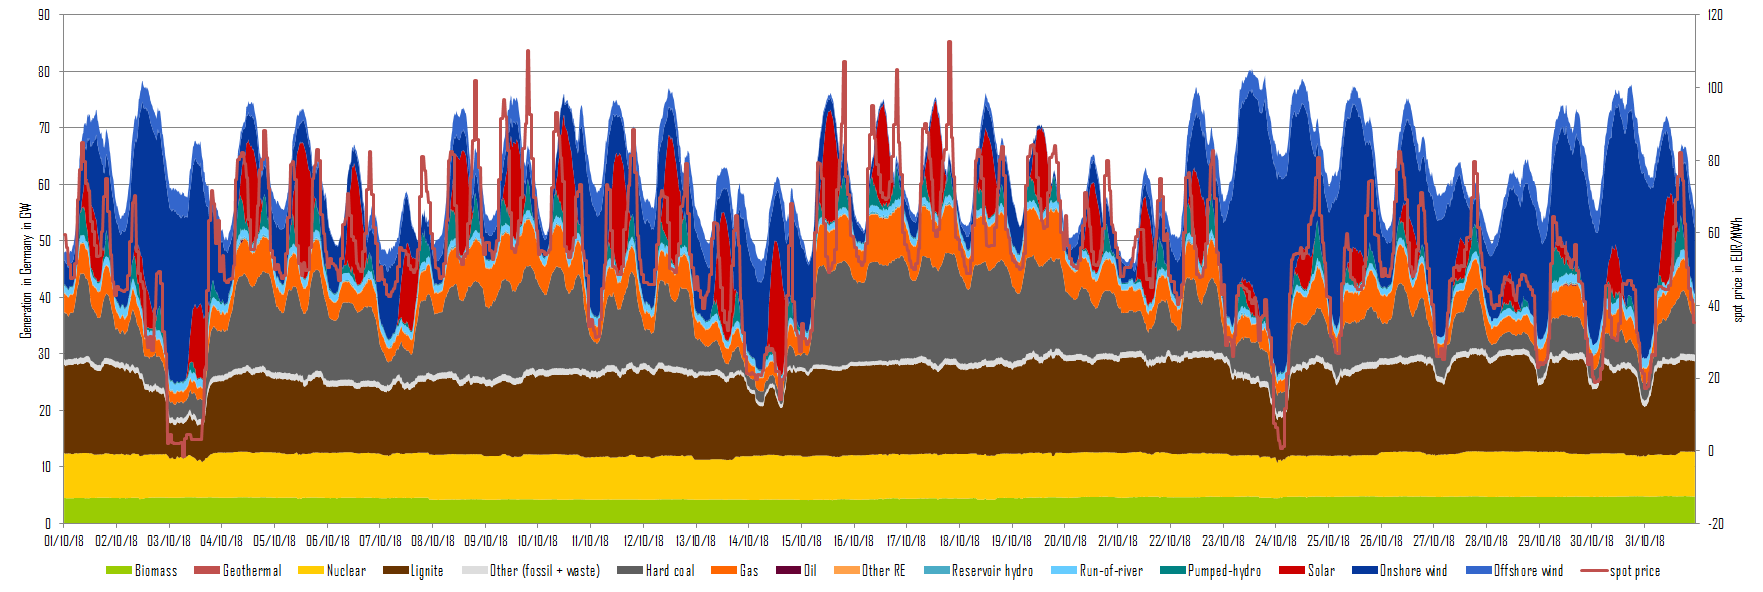 Electricity generation and day-ahead prices in October 2018 in Germany, (Source: Energy Brainpool)